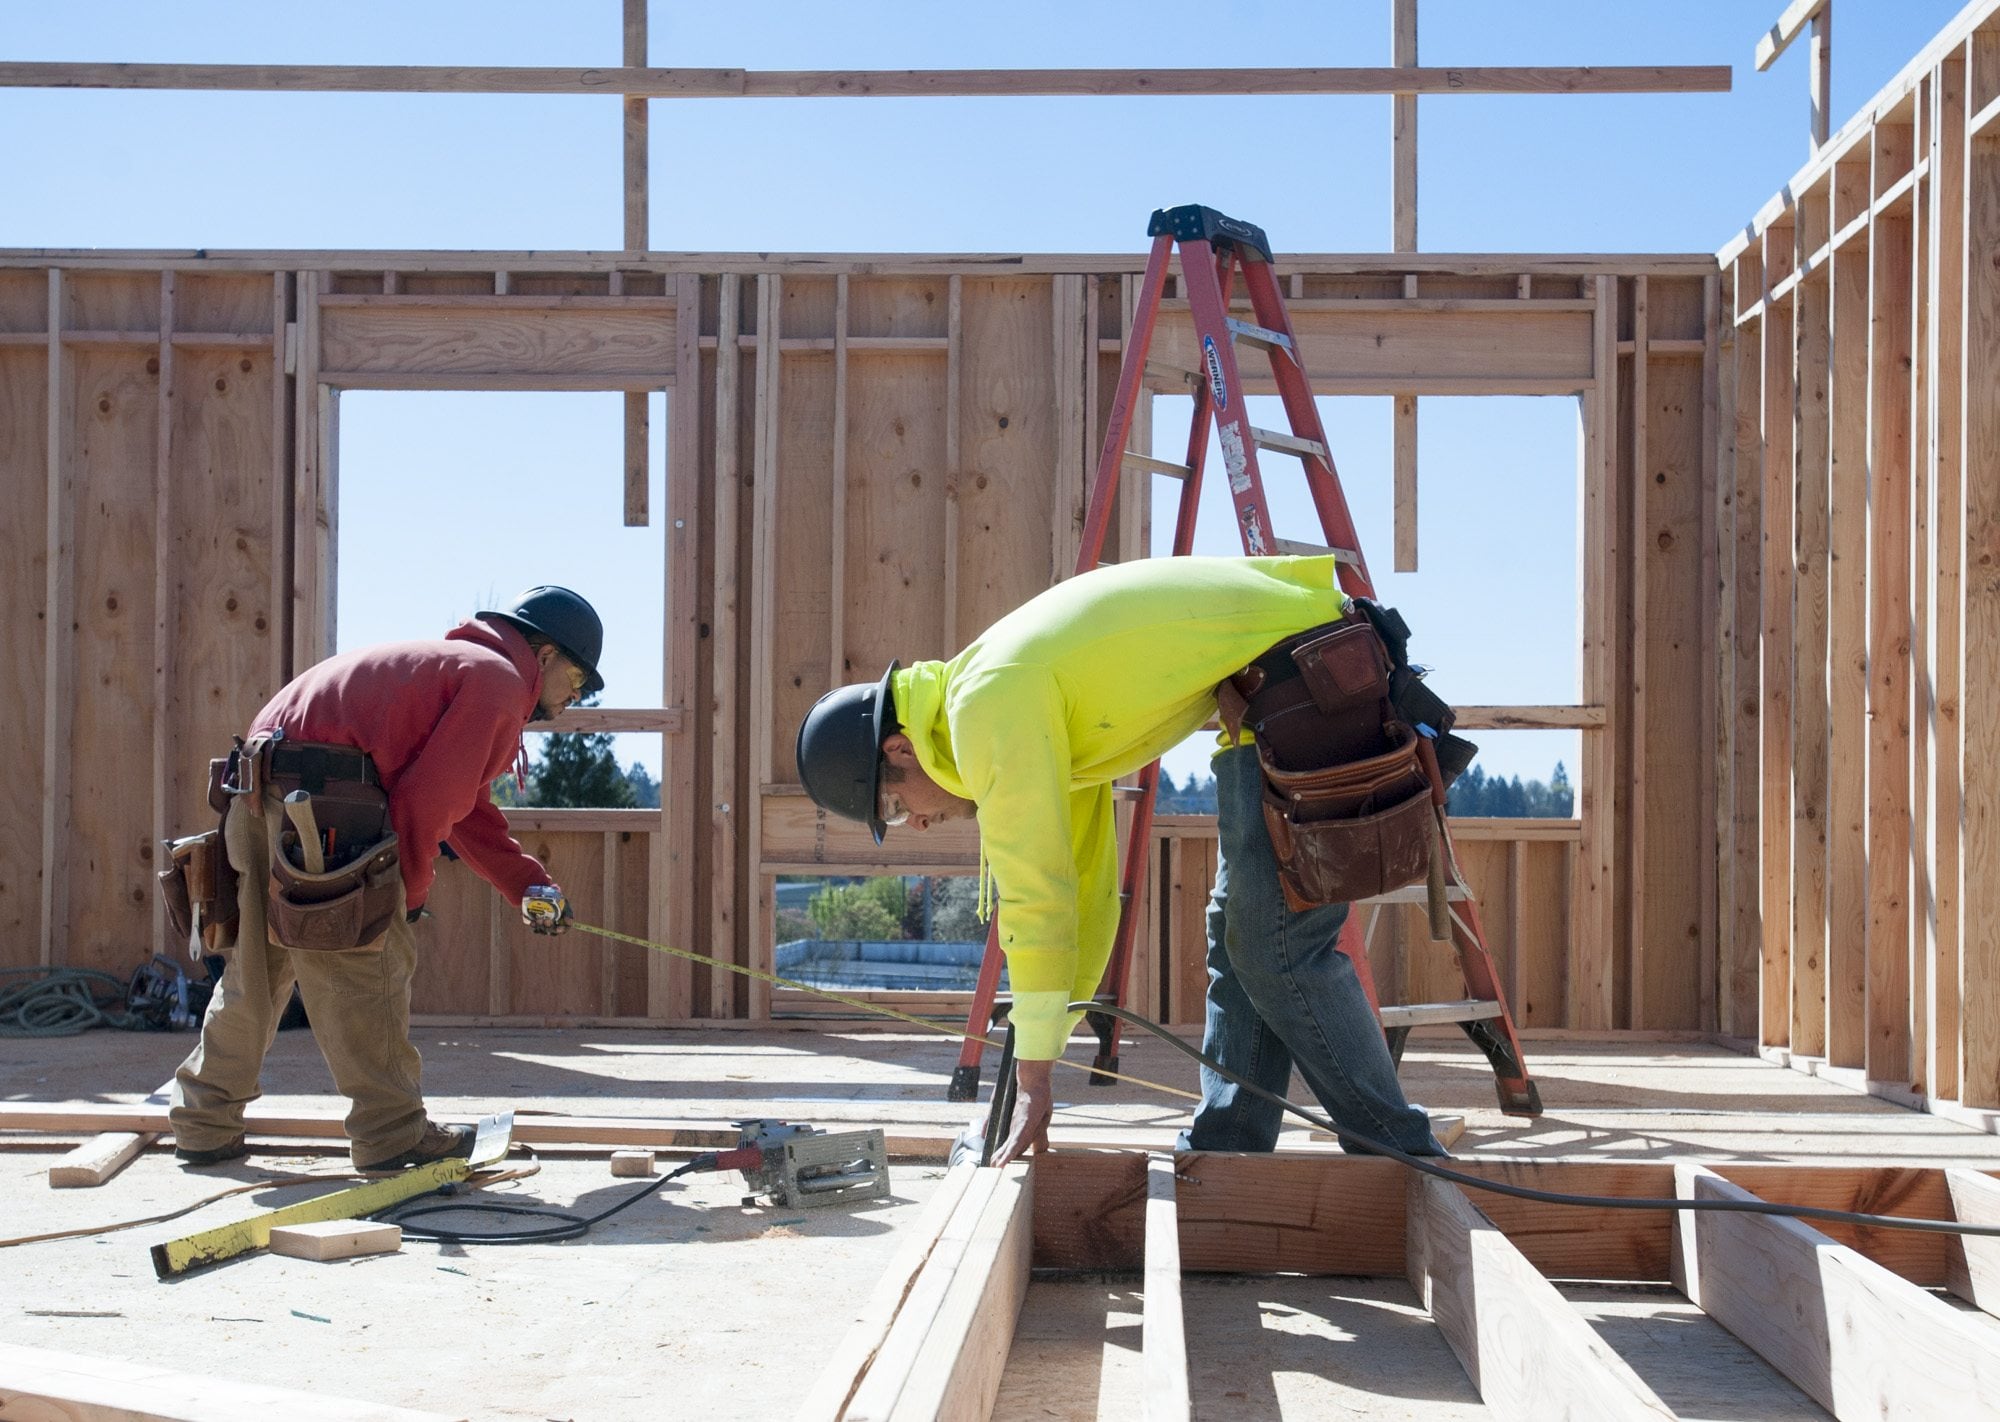 Juan Garcia, right, works Tuesday on framing a room at the Isabella Court apartment complex construction site in central Vancouver. A 180-unit apartment building is planned nearby at 5500 N.E. Fourth Plain Blvd.